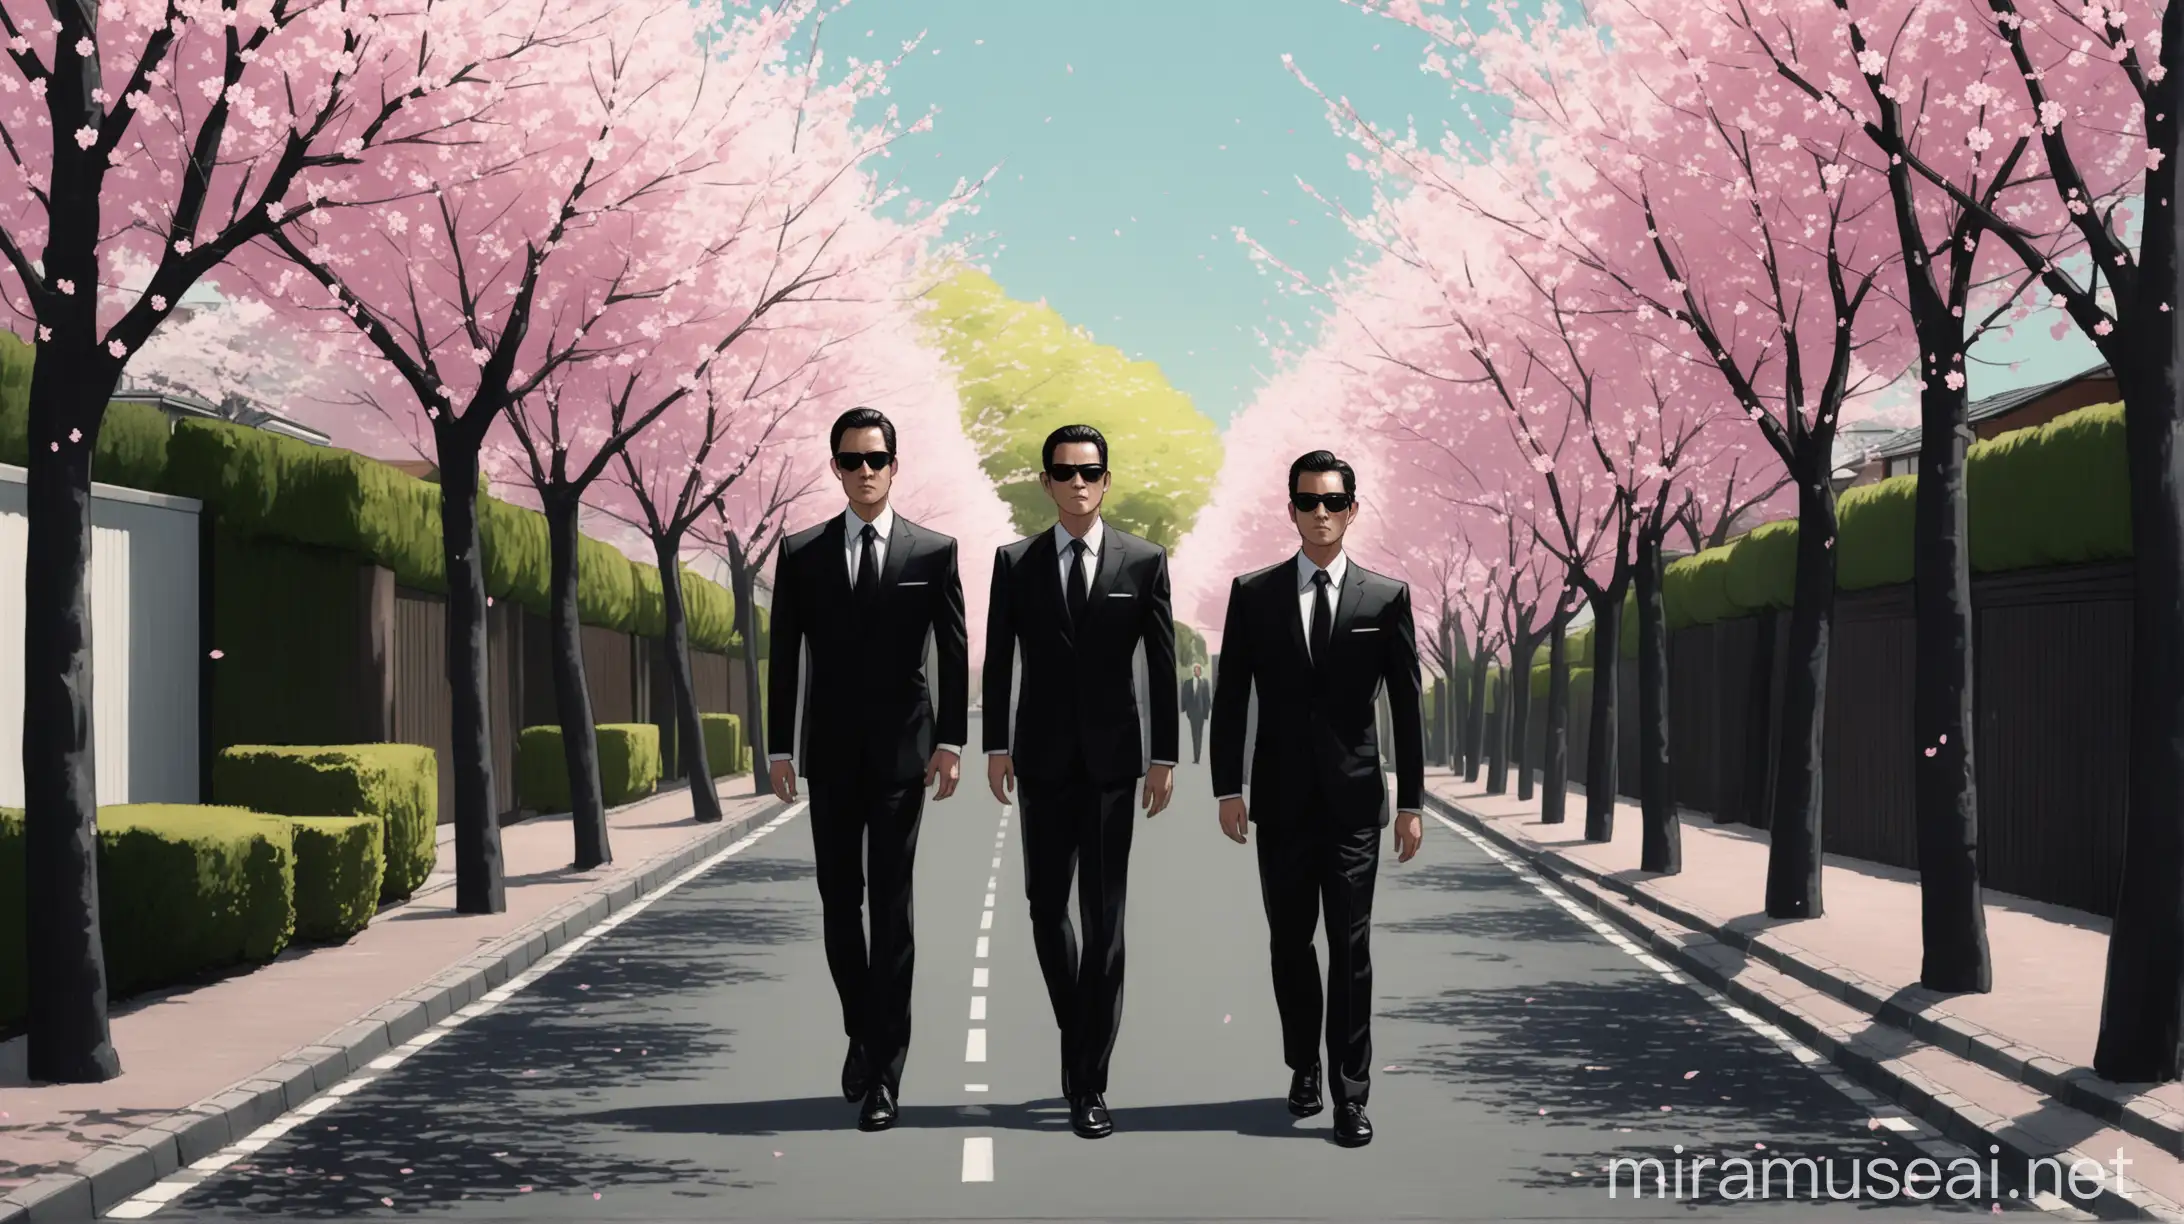 three identical men in black suits and dark sunglasses, a quiet suburban street lined with cherry blossom trees